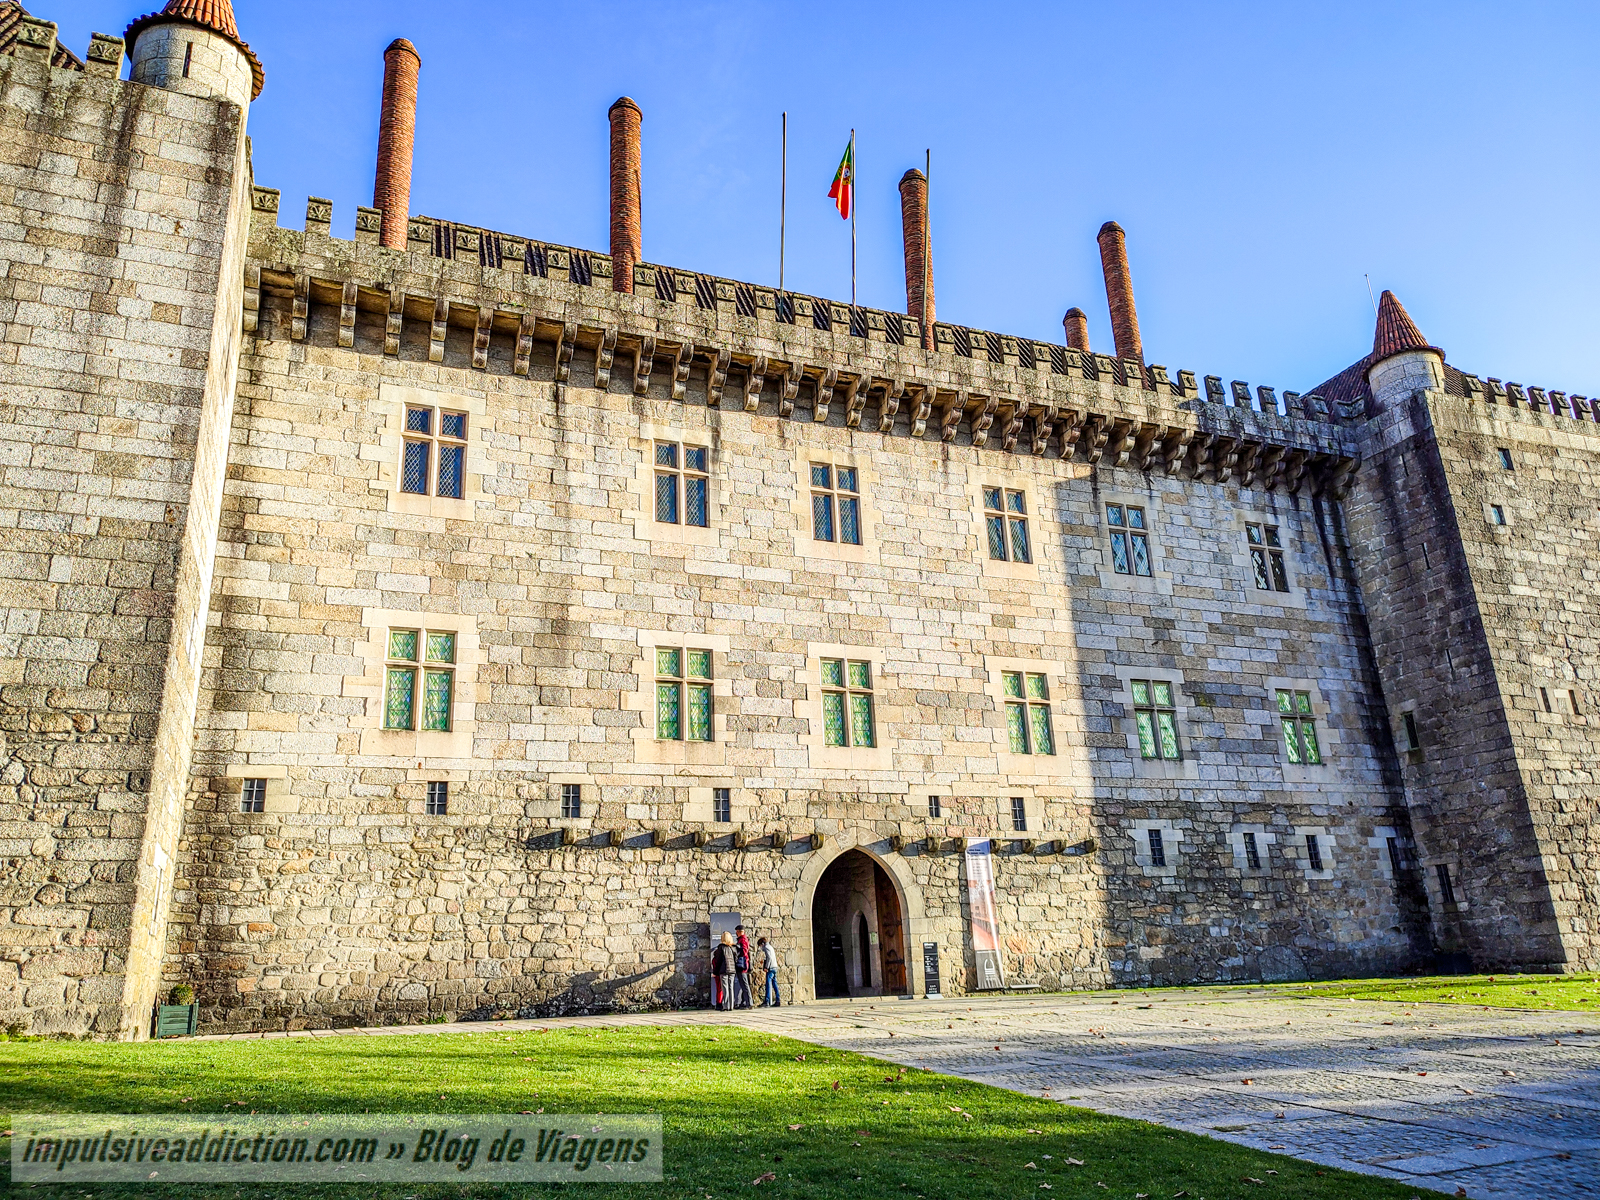 Ducal Palace of Guimarães on a day trip from Porto